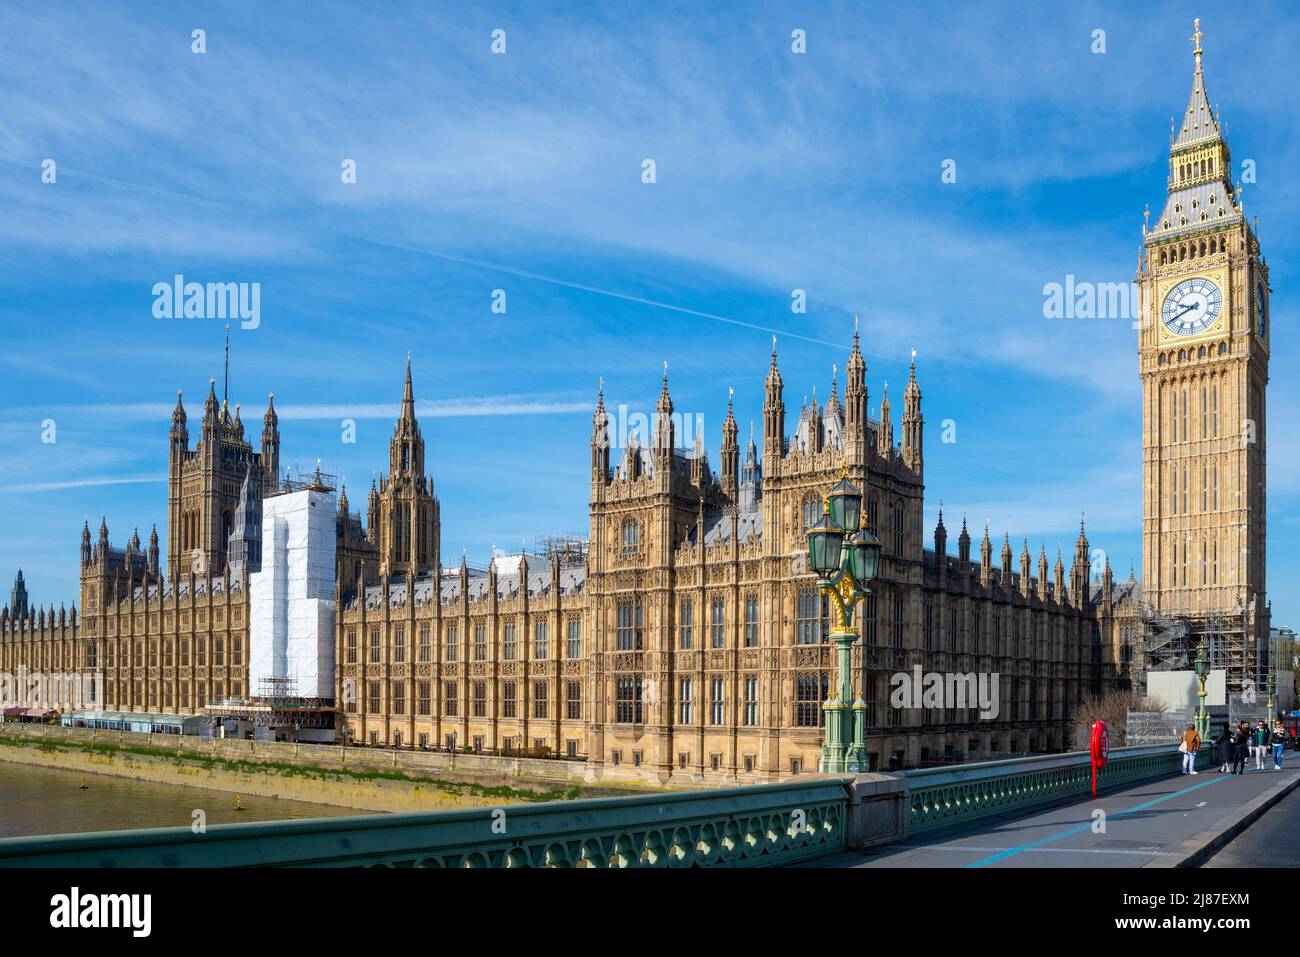 Restored Elizabeth Tower, Big Ben of Palace of Westminster recently uncovered with the last of the scaffolding remaining. Houses of Parliament, London Stock Photo